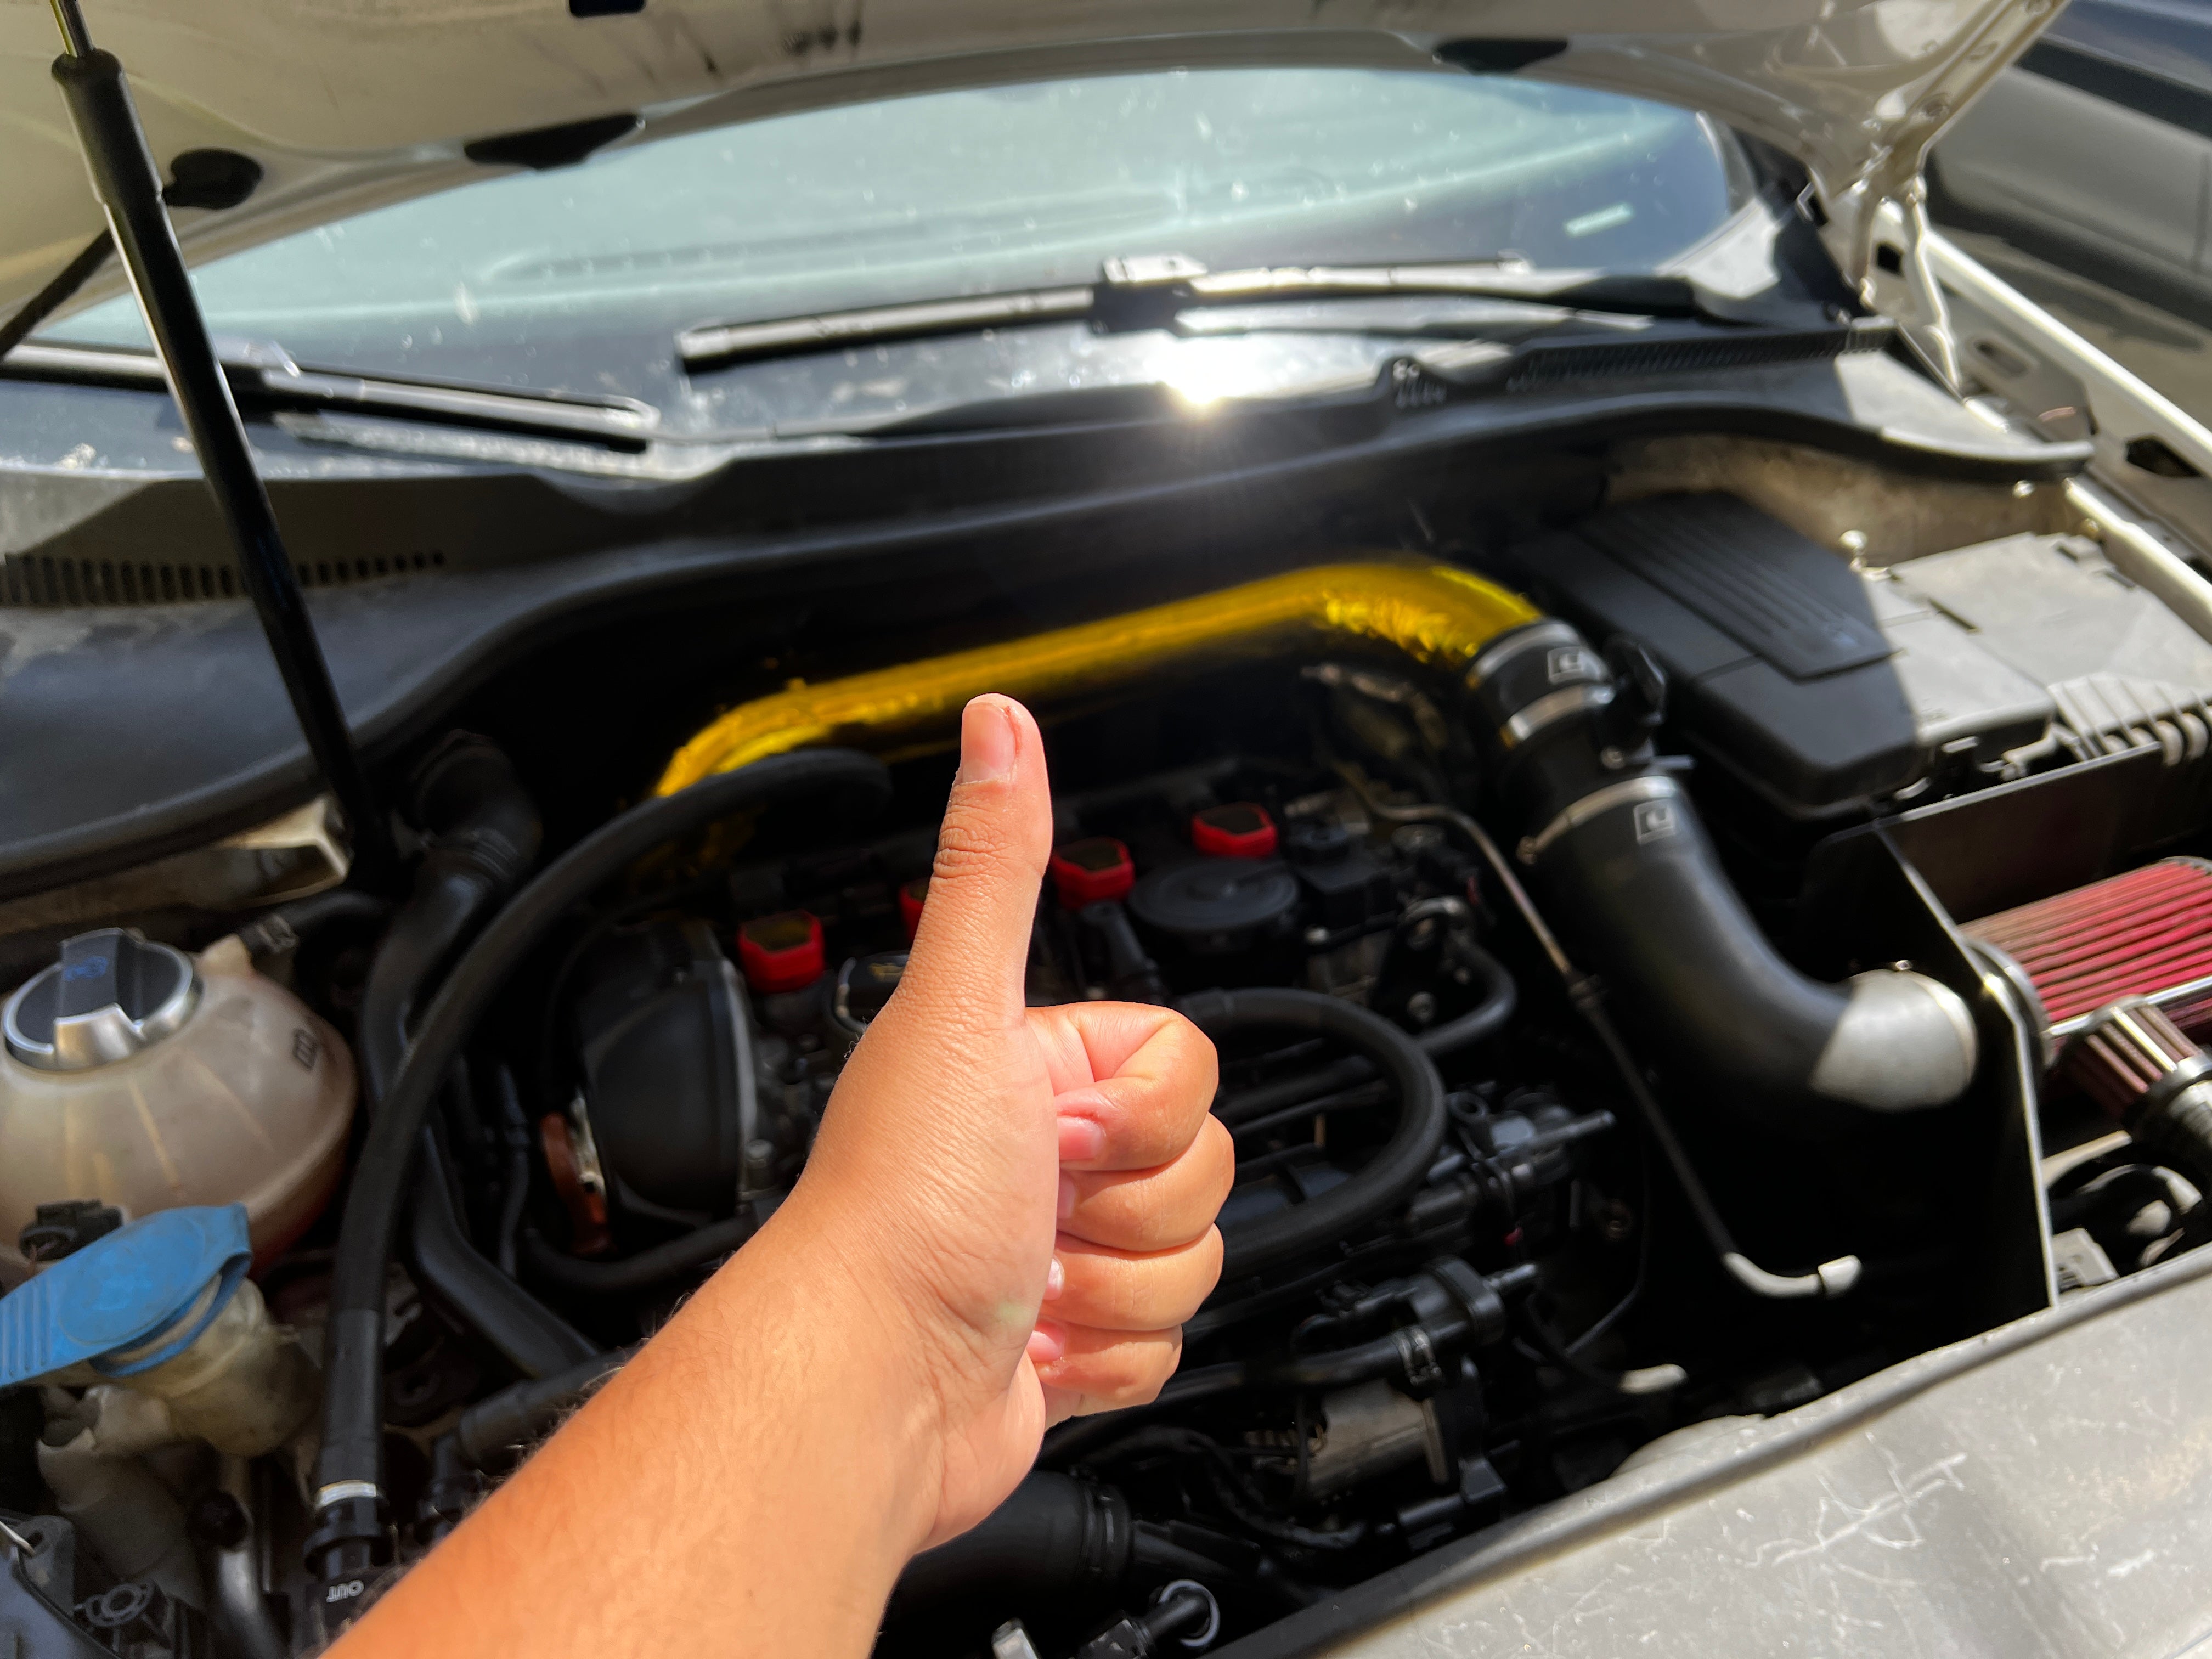 Author giving a thumbs up to the completed engine bay of his repaired GTI.